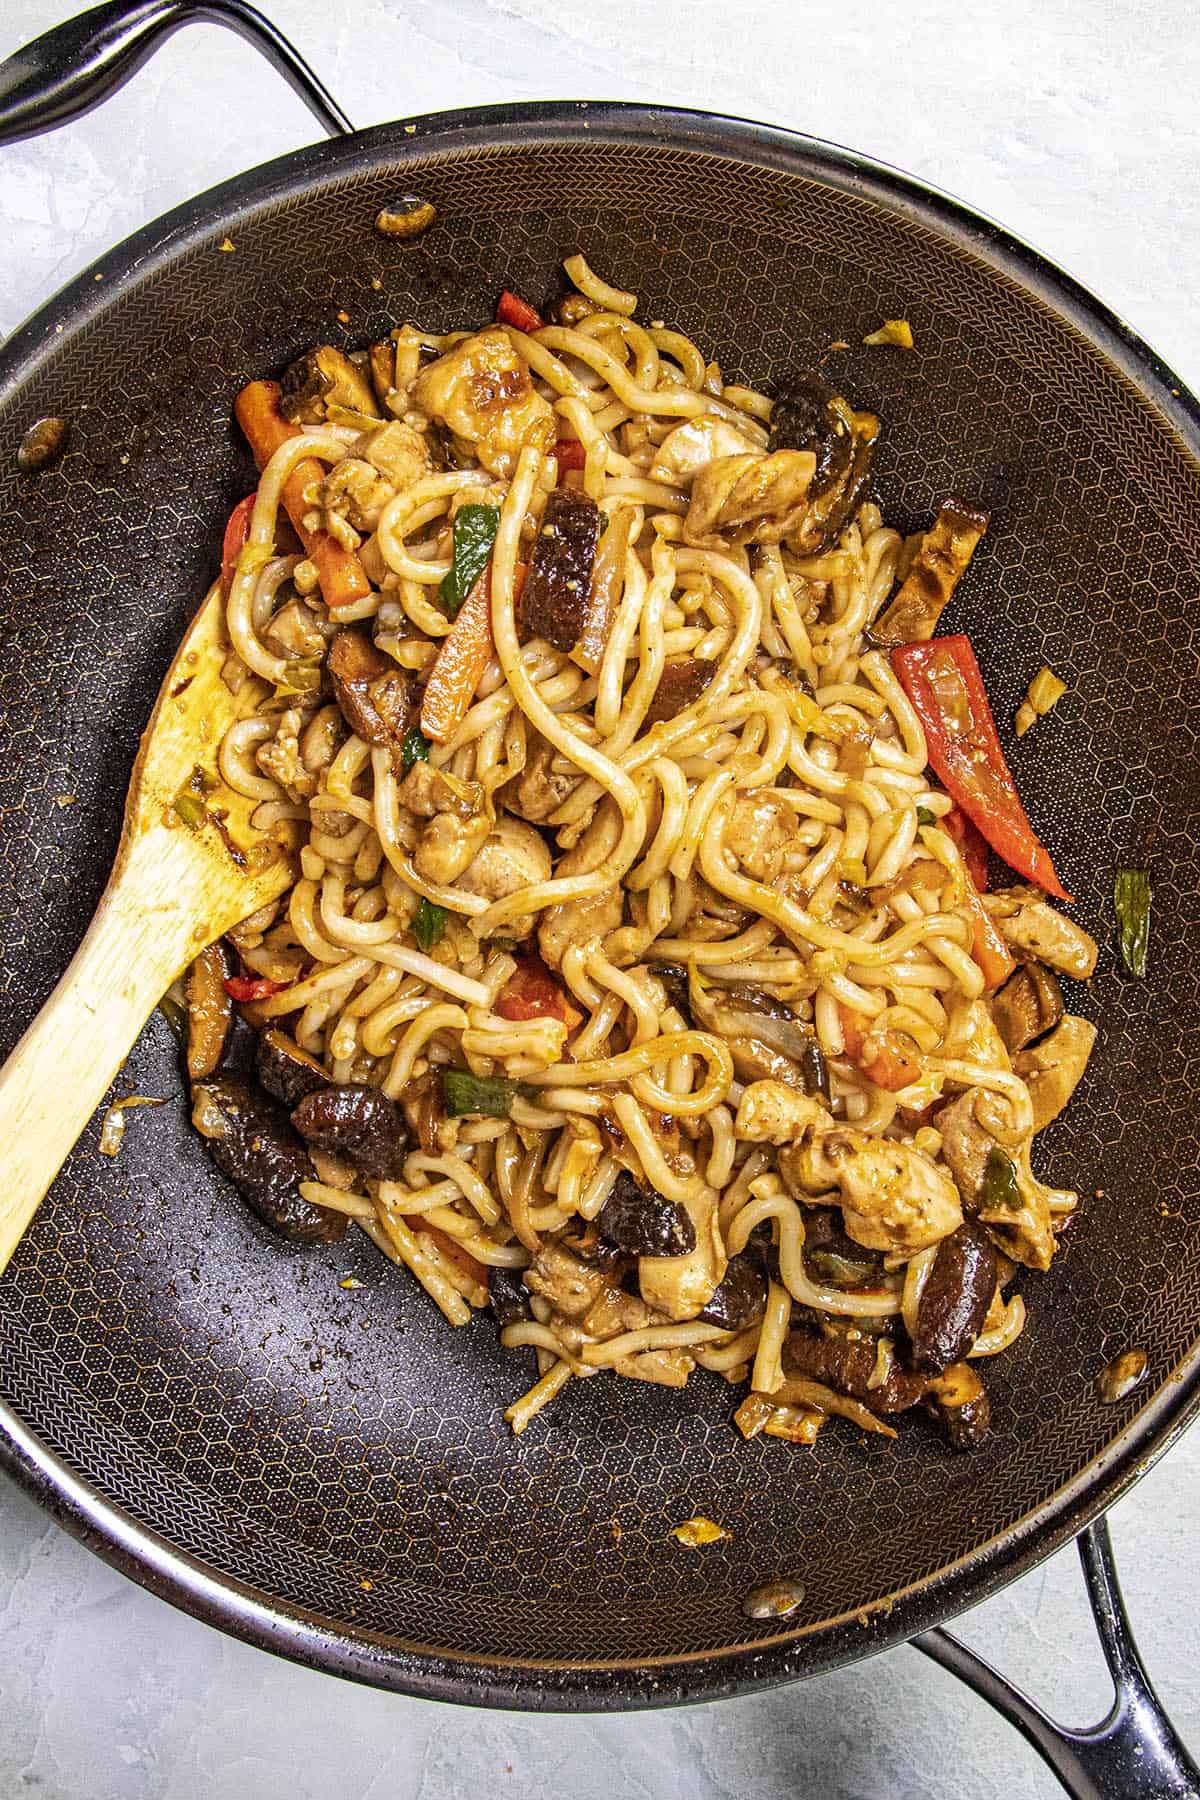 Stirring noodles and yaki udon sauce into the wok with vegetables